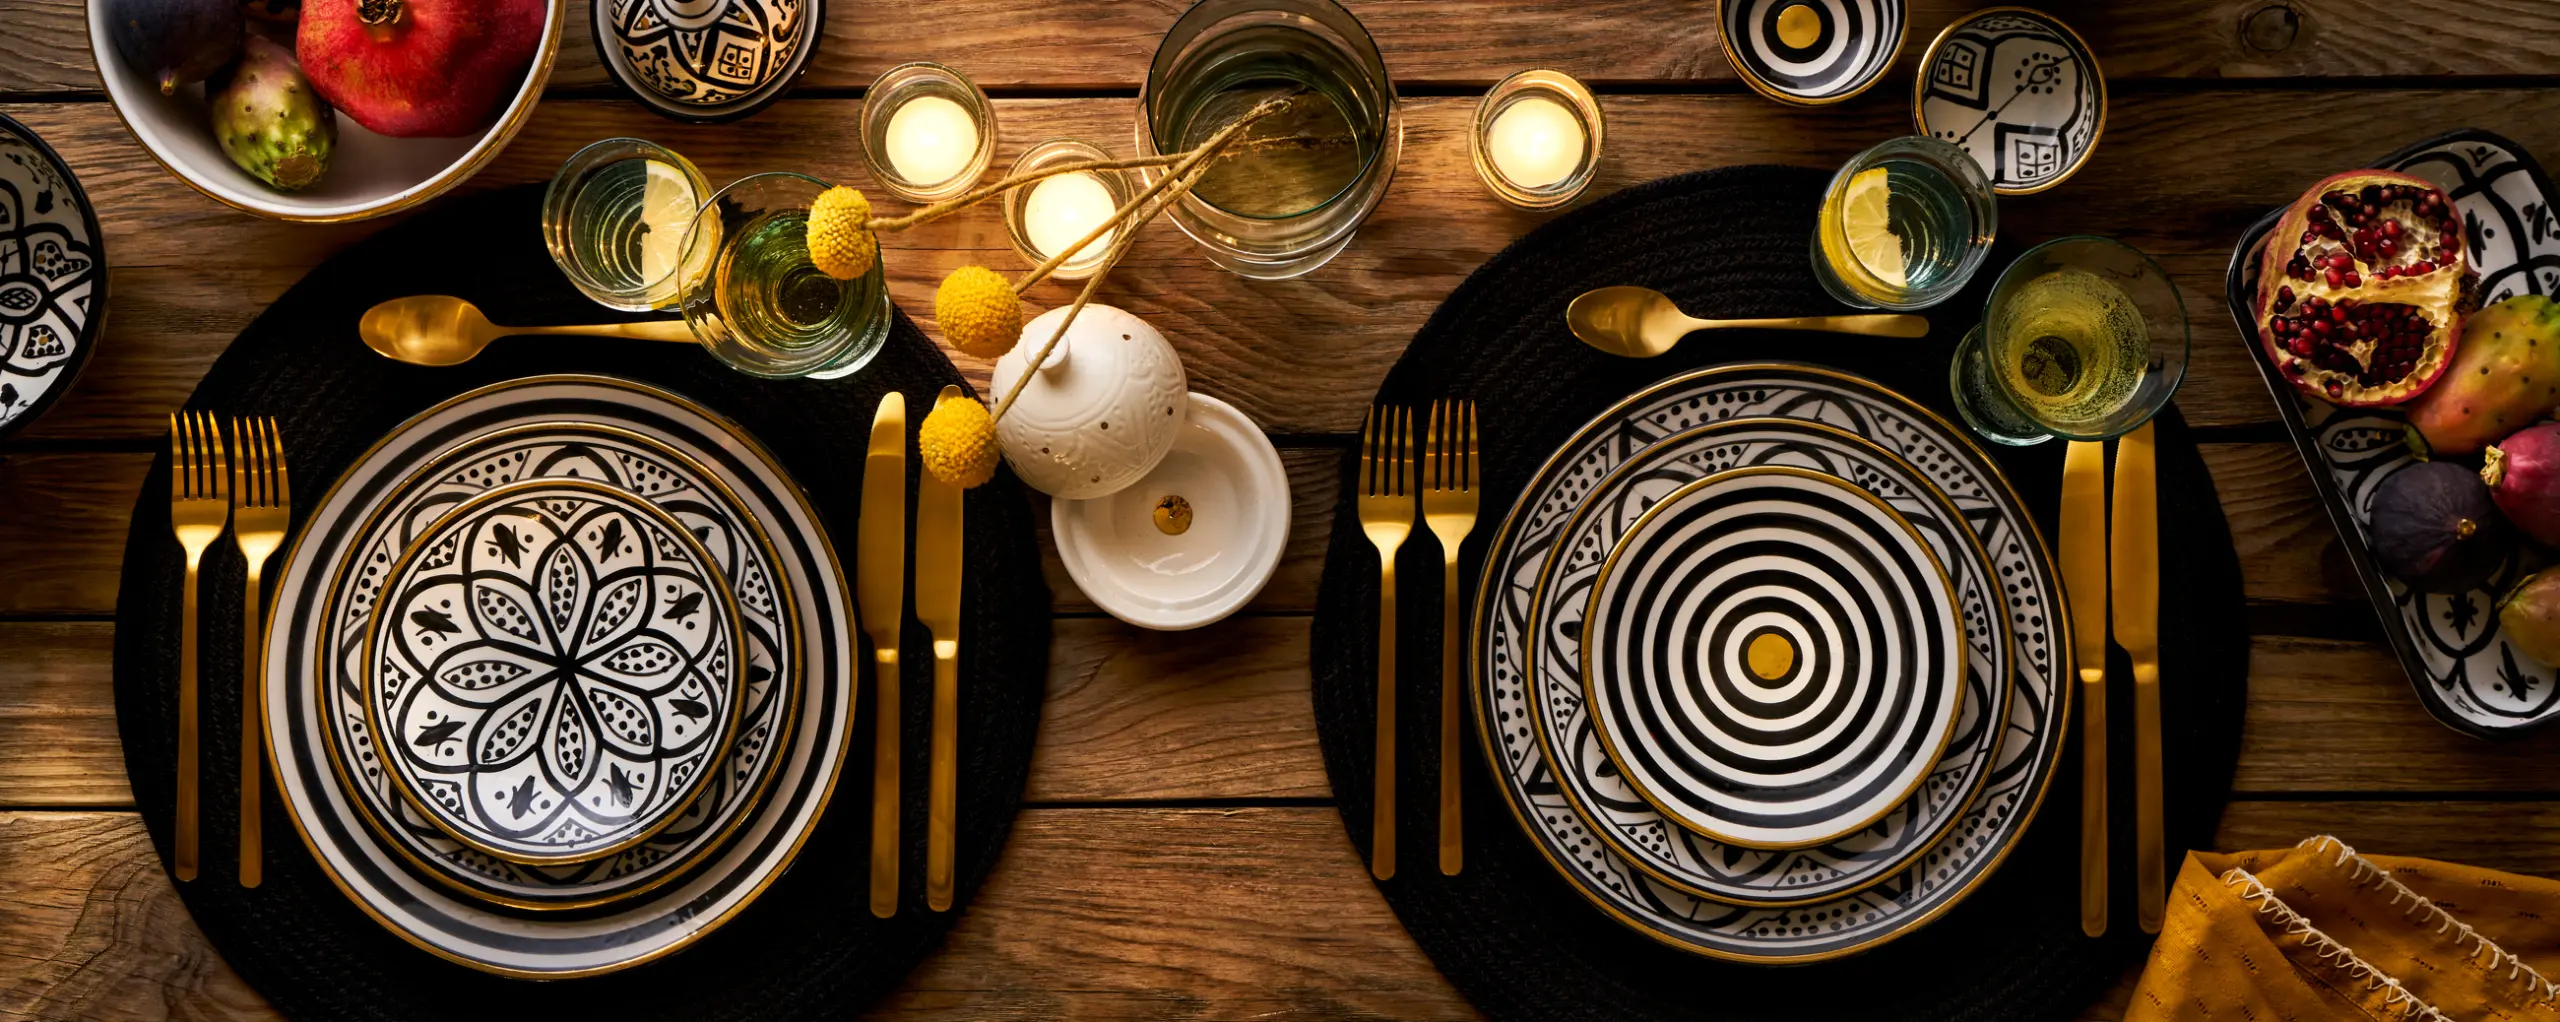 tabletop photography of plates and decoration, glasses and cutlery